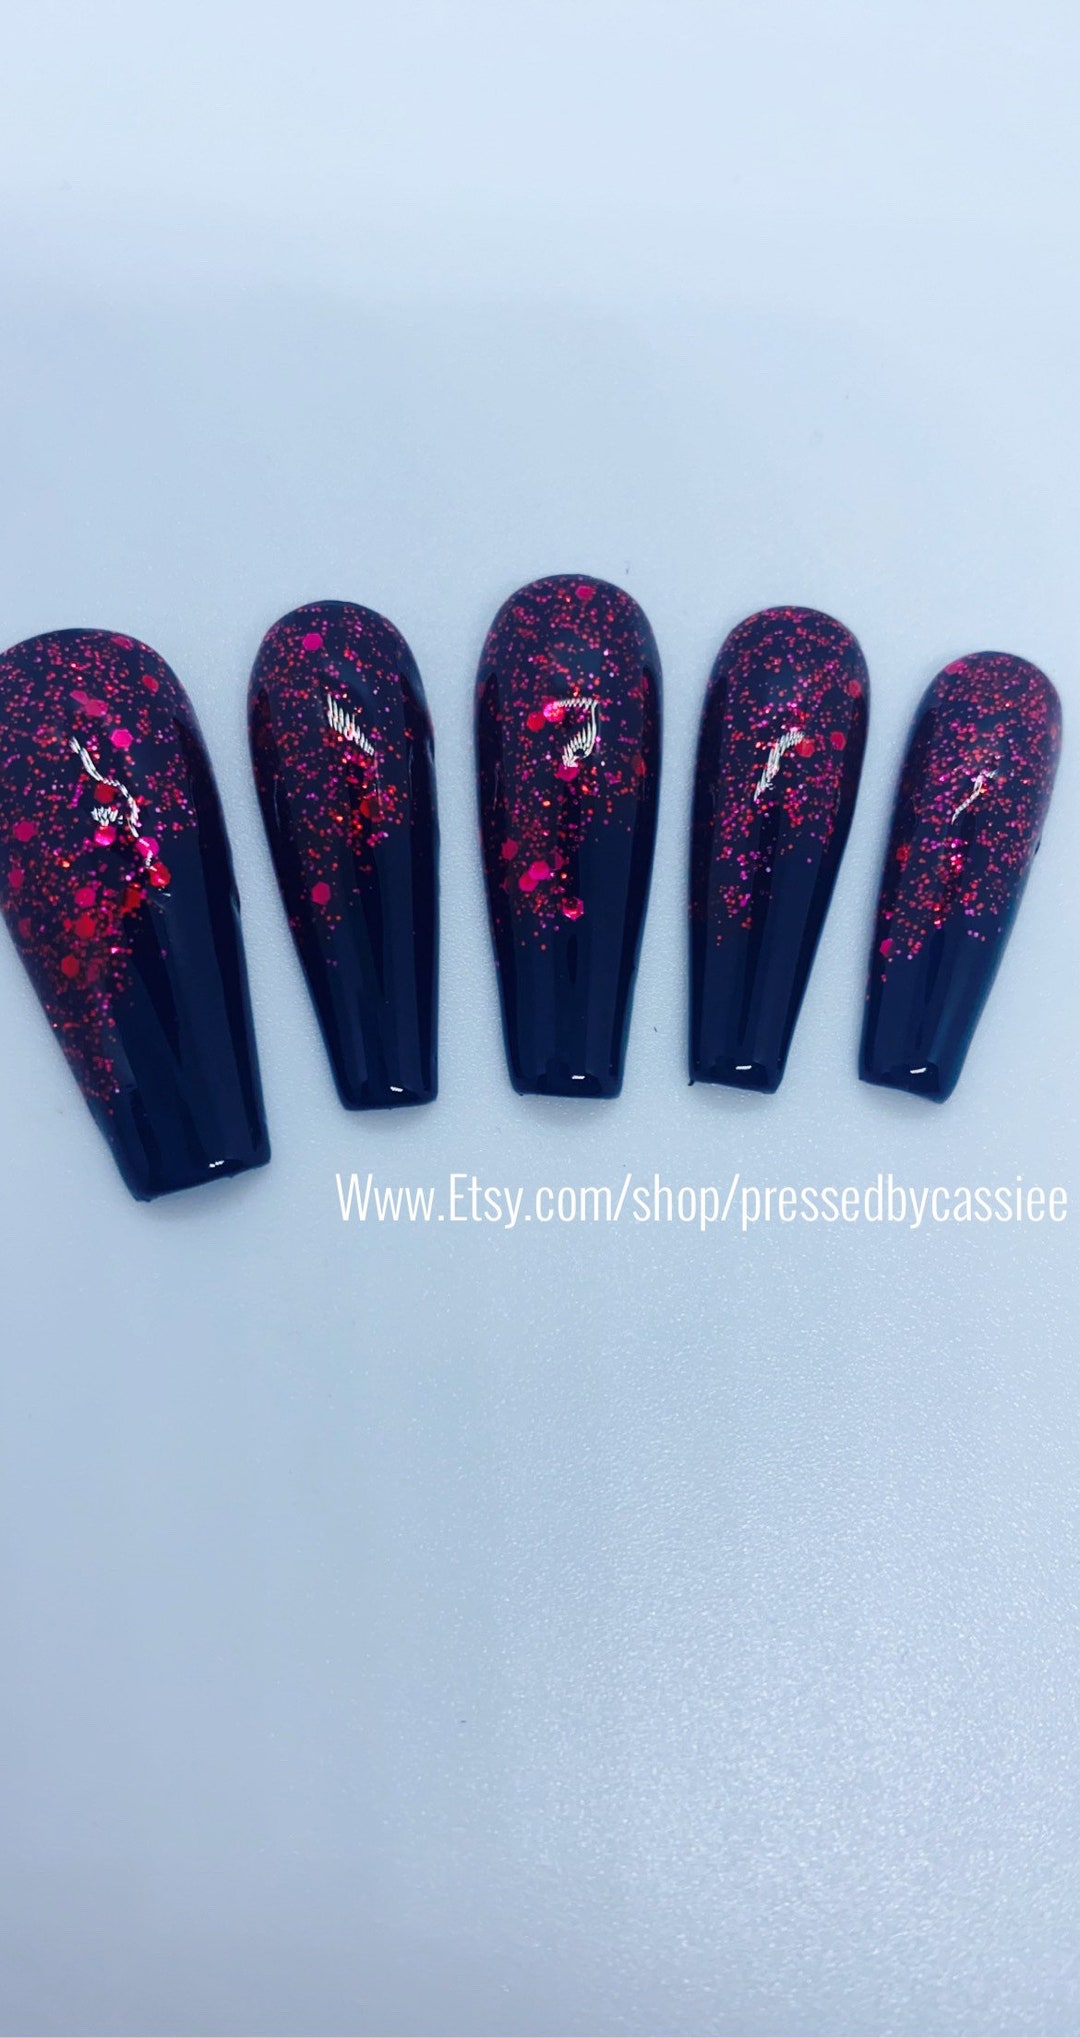 Victoria Nails - Black + Red + Black Sugarcoated glitter will fit into the  Halloween! 👹🎃#blackredombre #sugarcoatednails #coffinnails  #blacknailsdesign #blackglitternails #southelginnails #saintcharlesnails |  Facebook